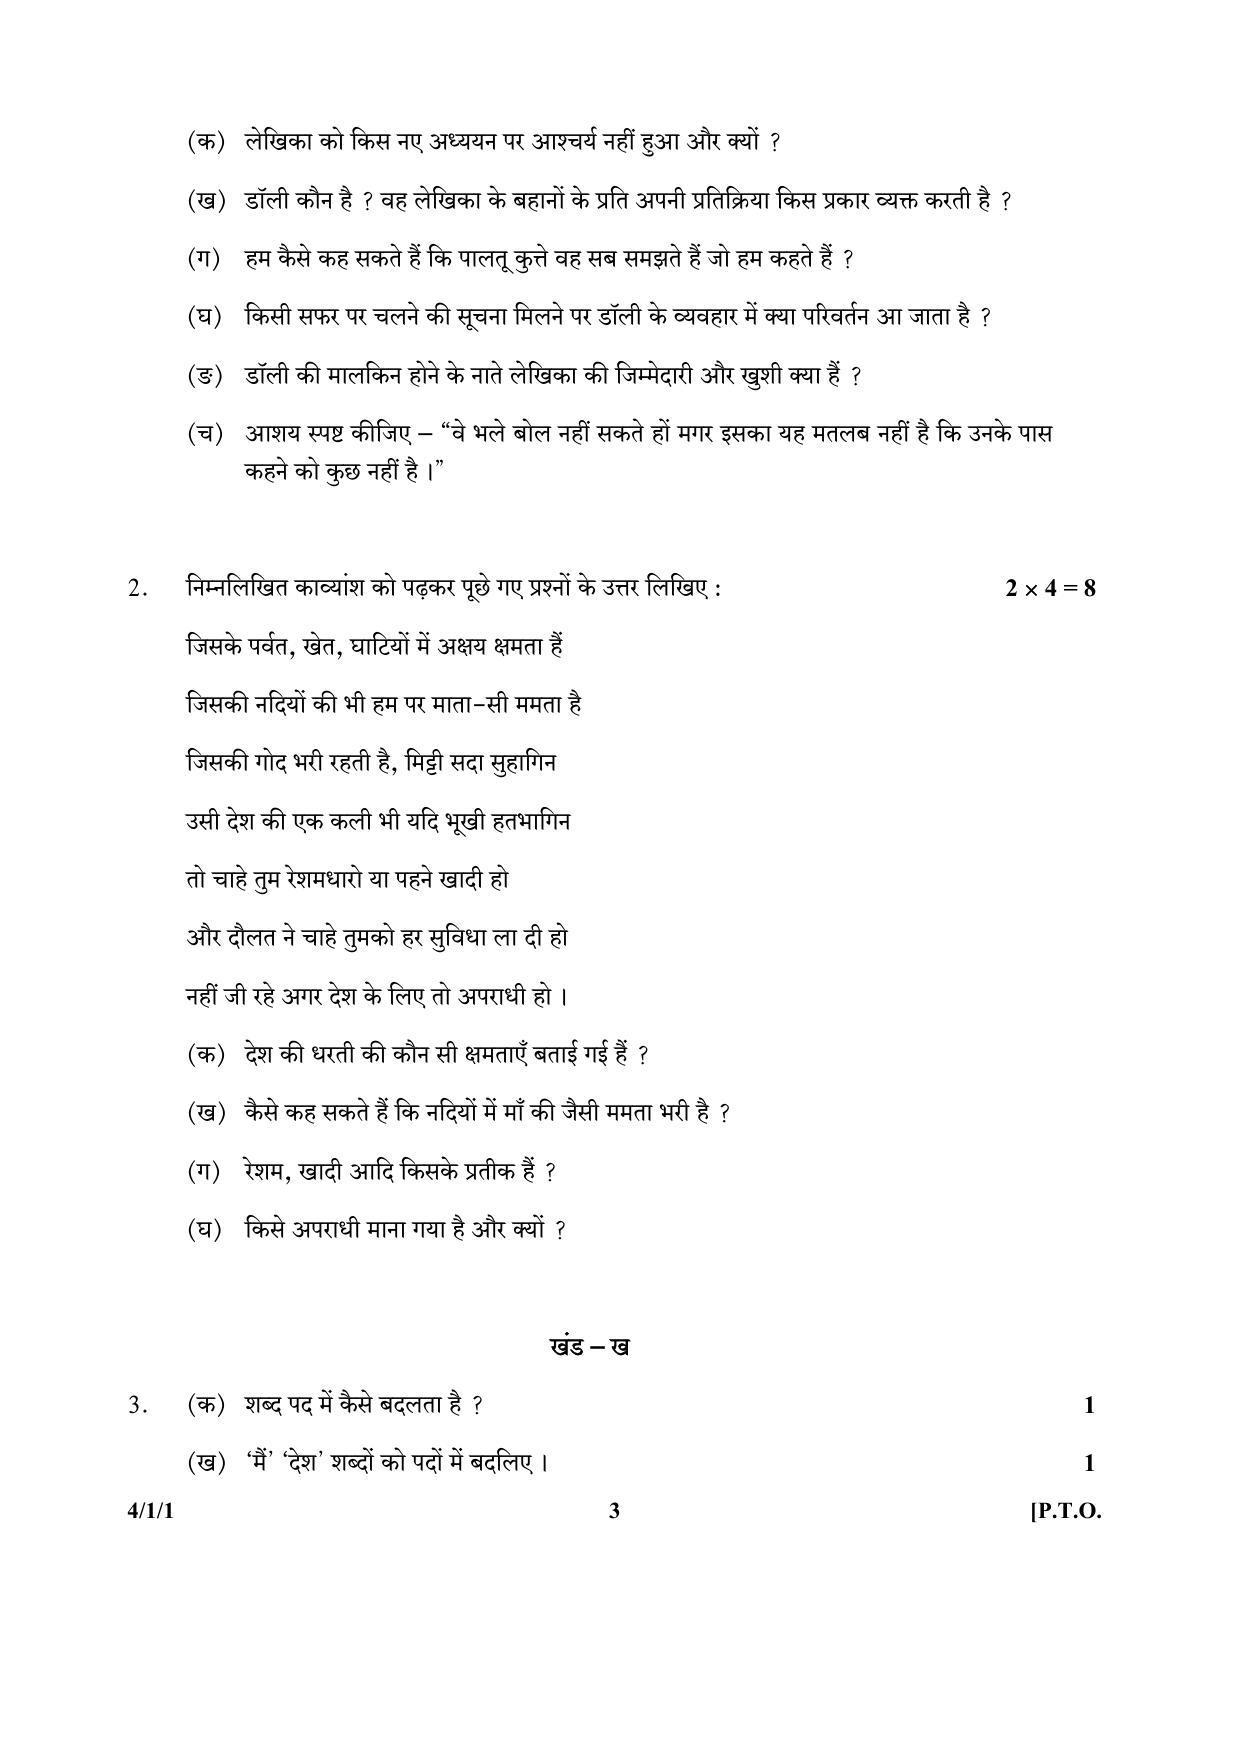 CBSE Class 10 4-1-1_Hindi 2017-comptt Question Paper - Page 3